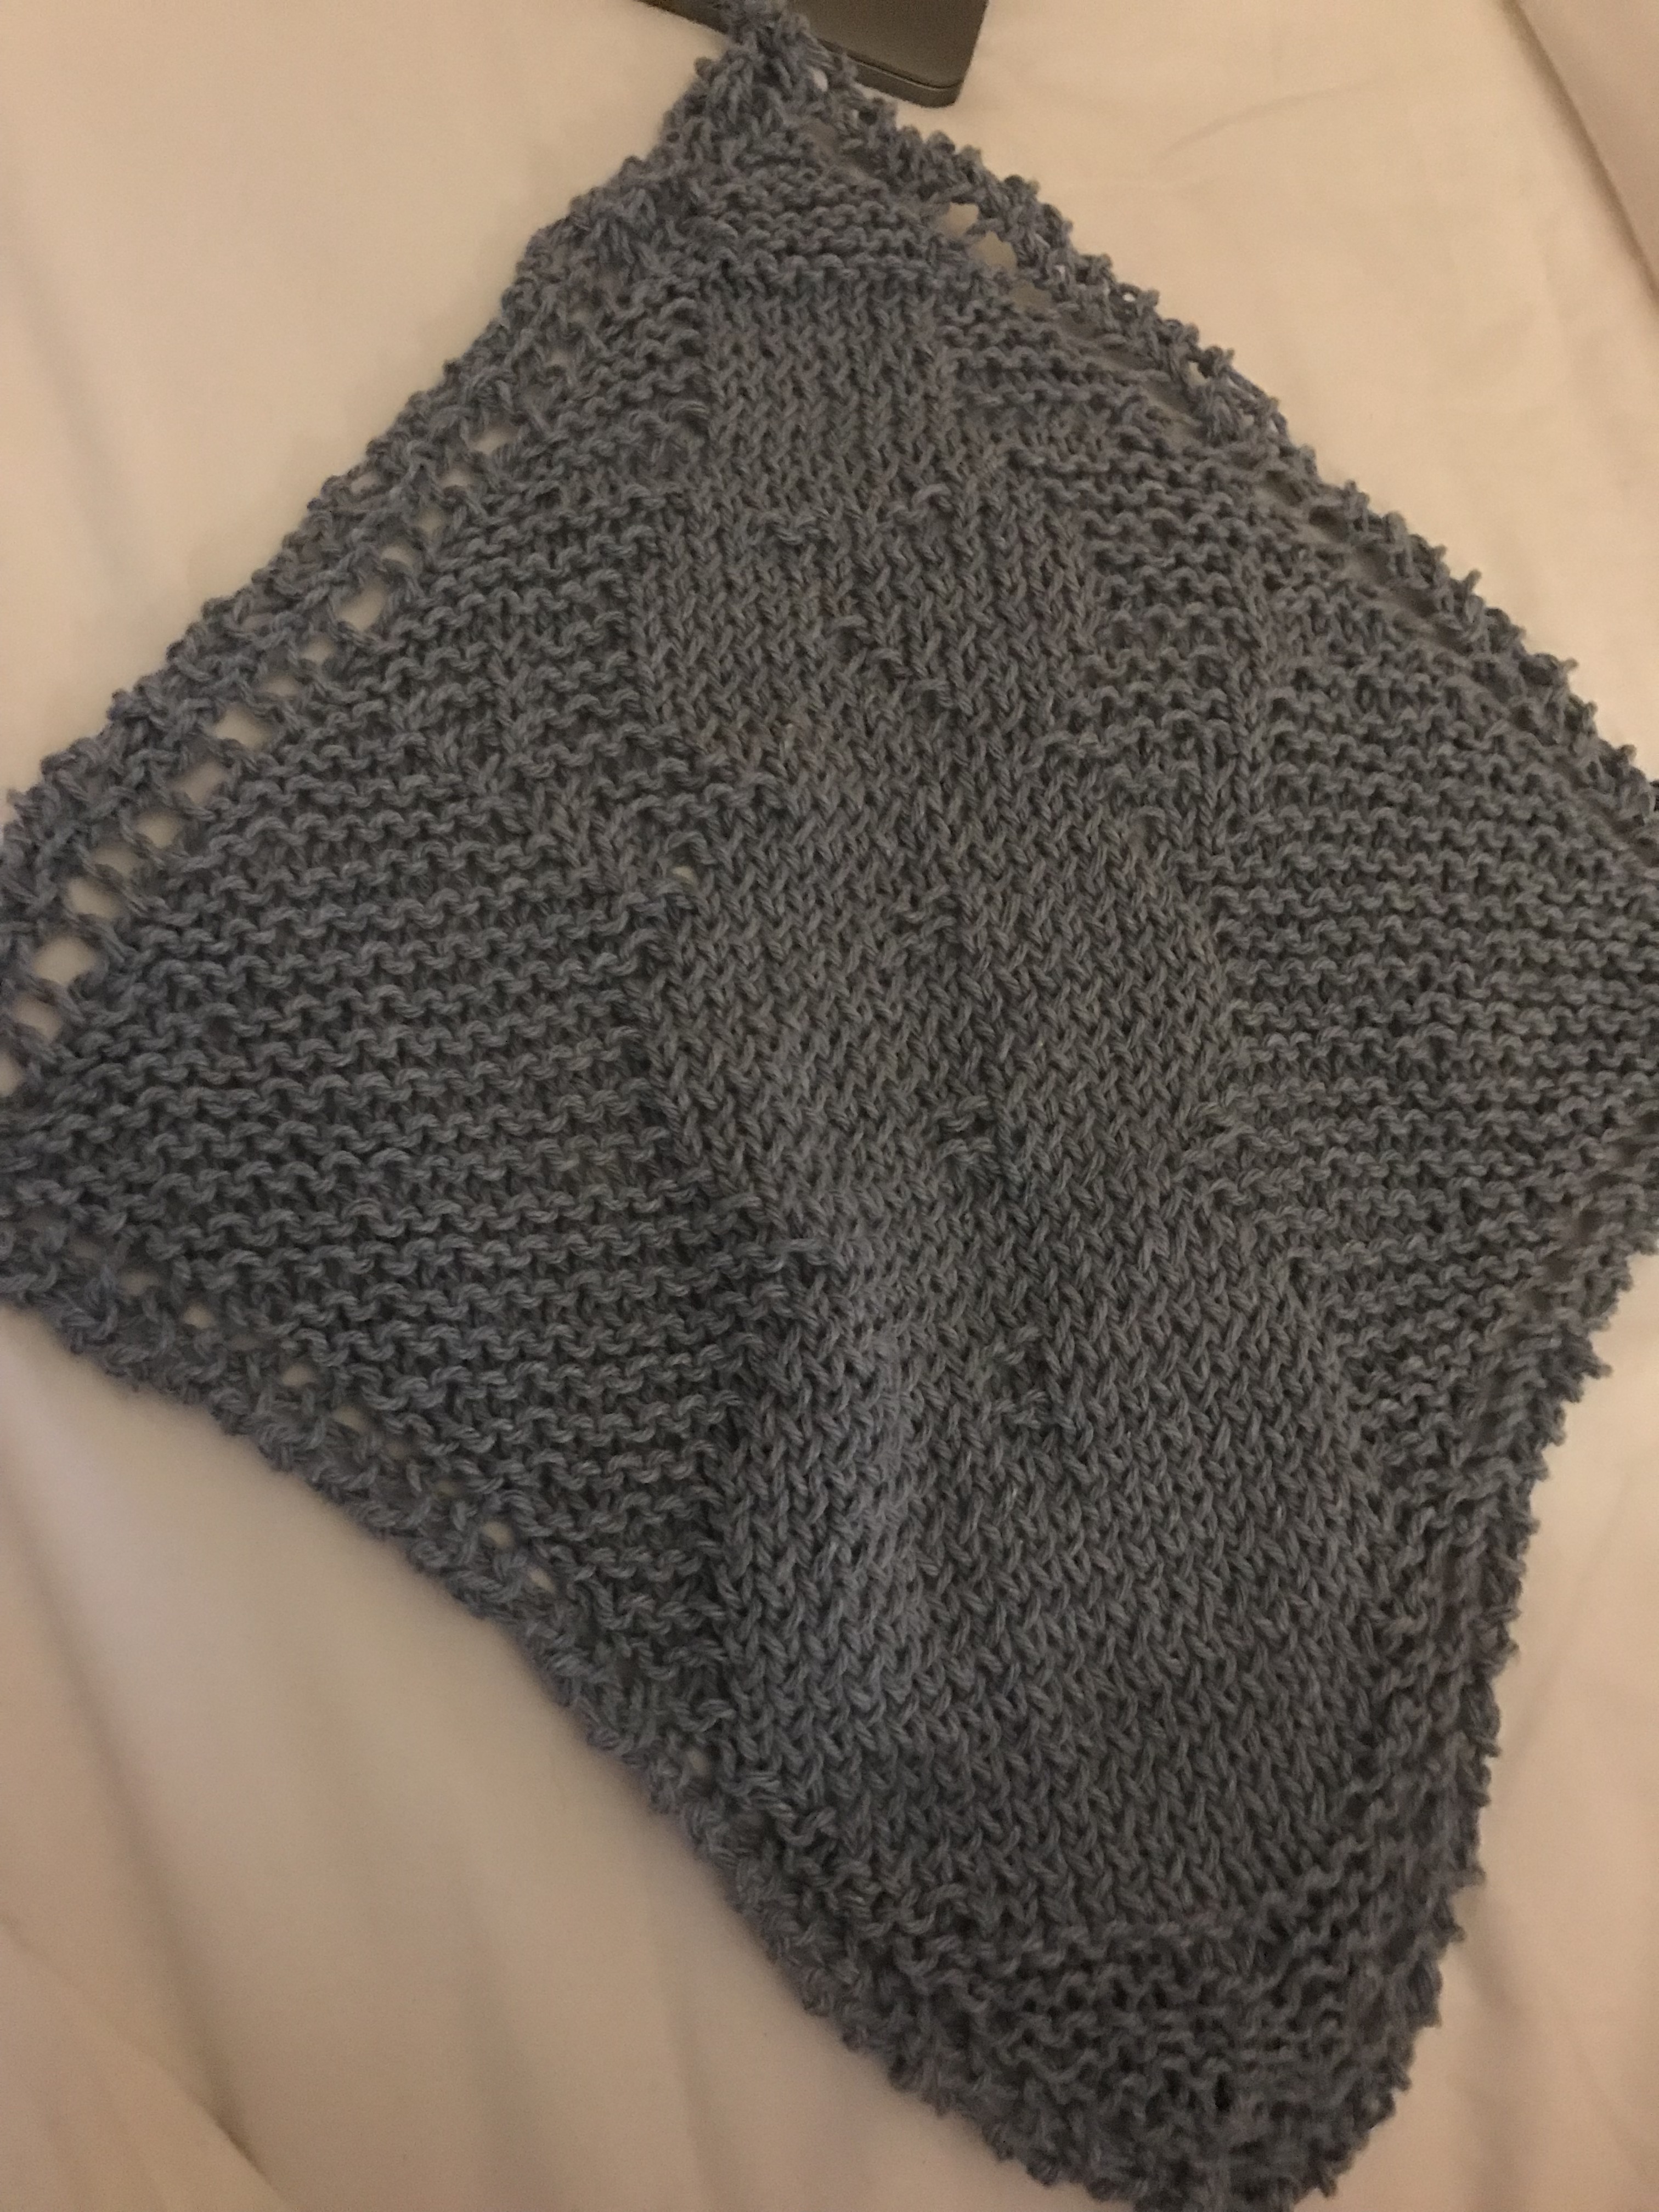 Just Off the Needles:  Snowman Cloth